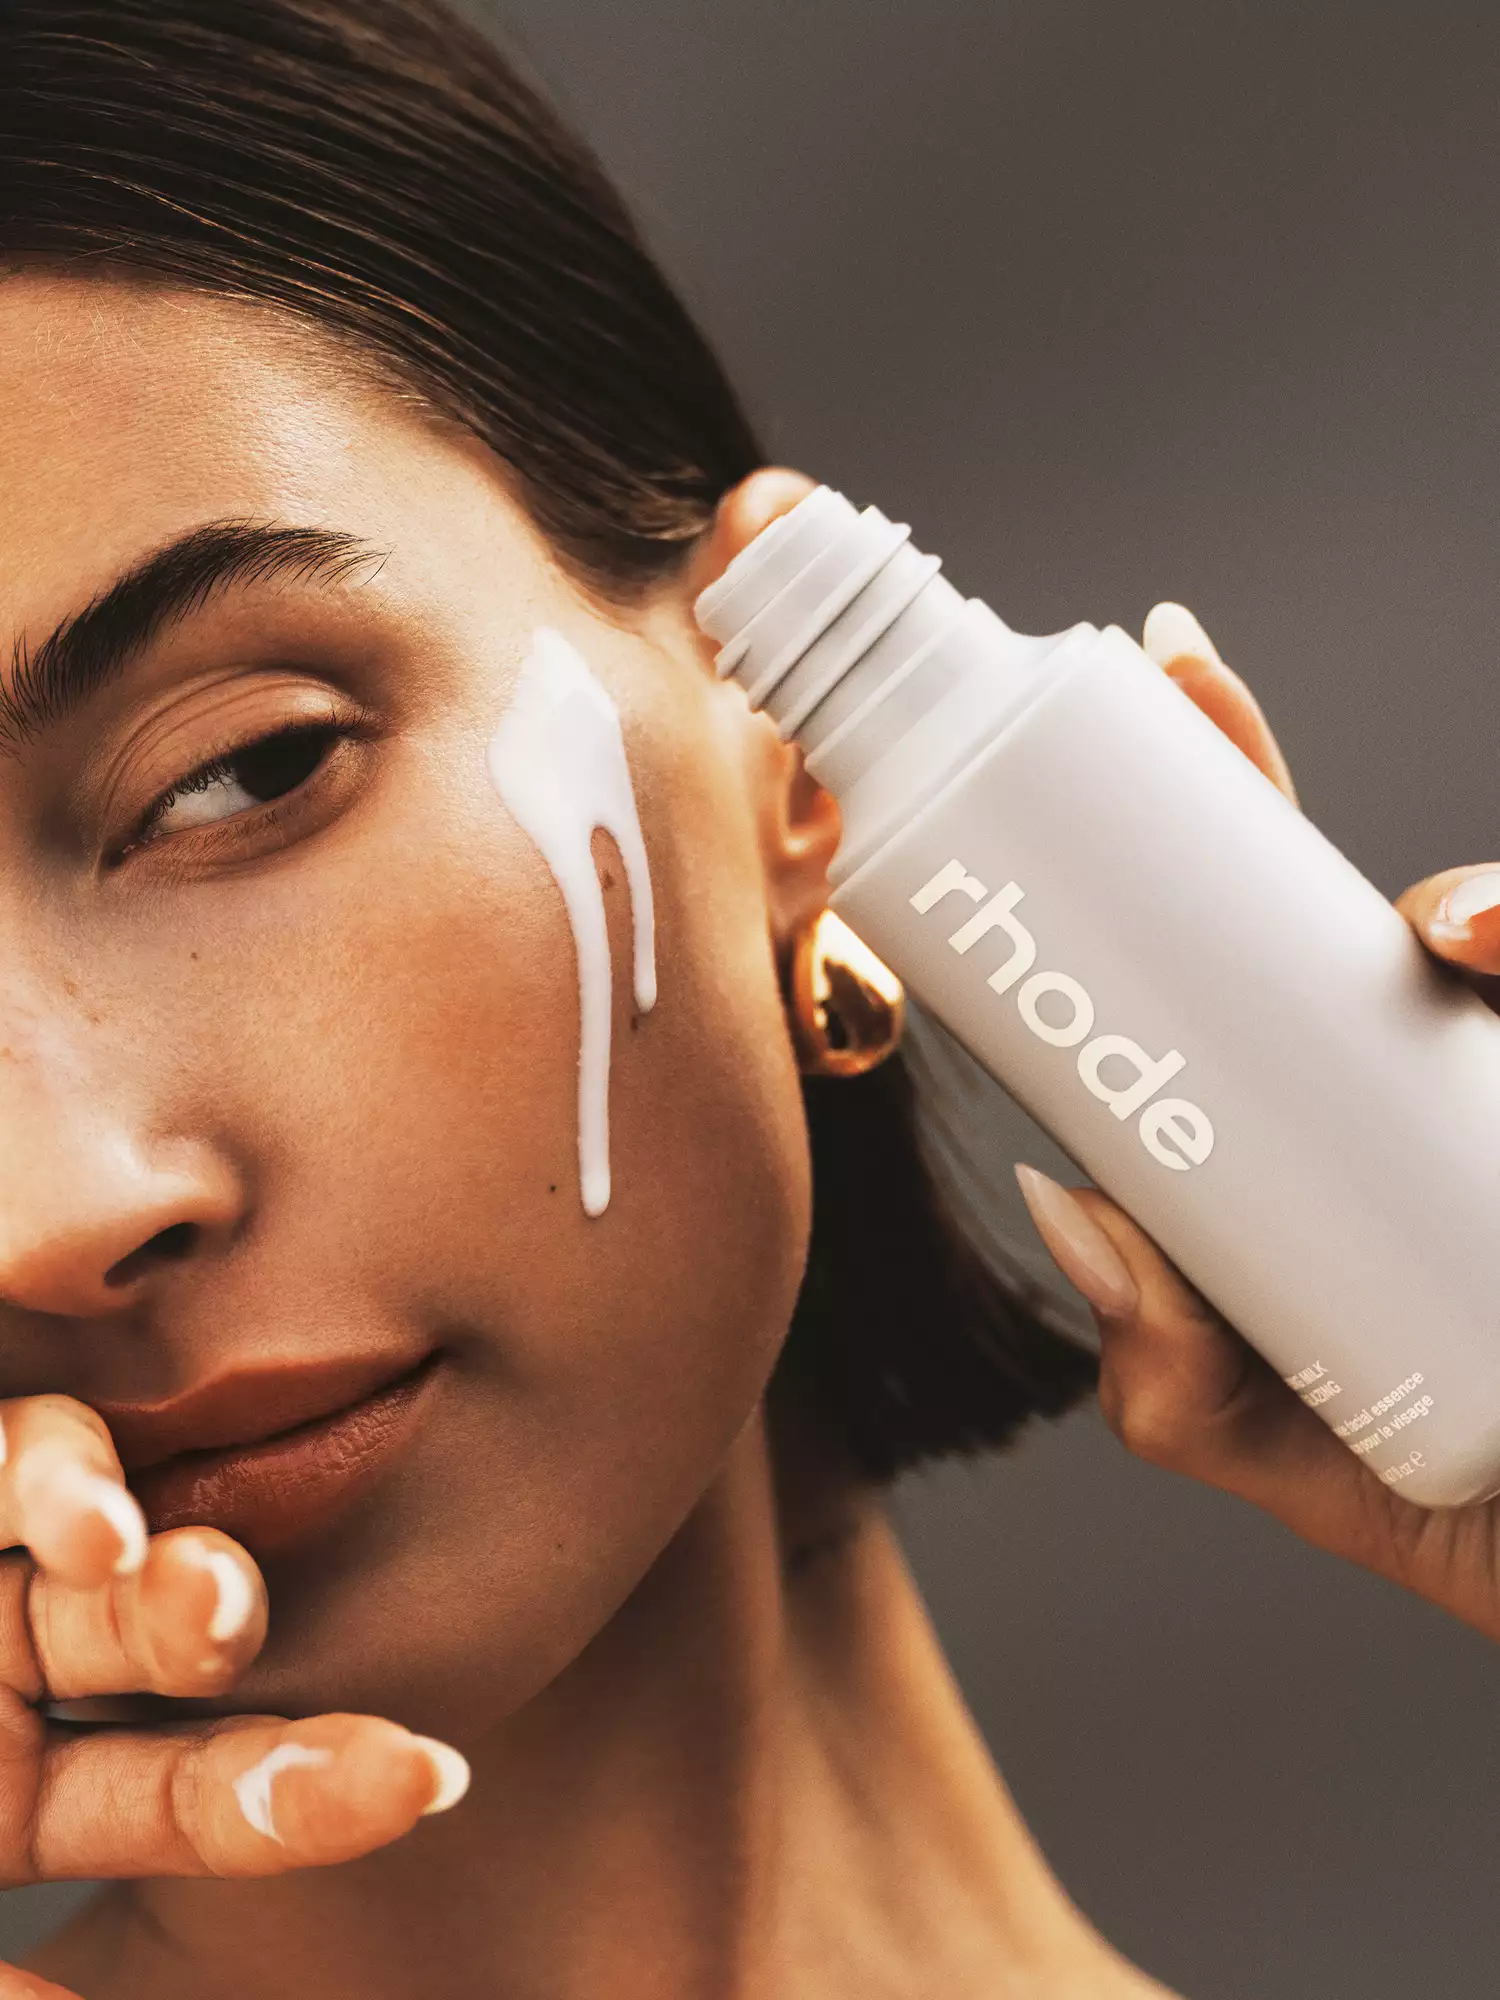 Hailey Bieber with new Rhode Glazing Milk on her face